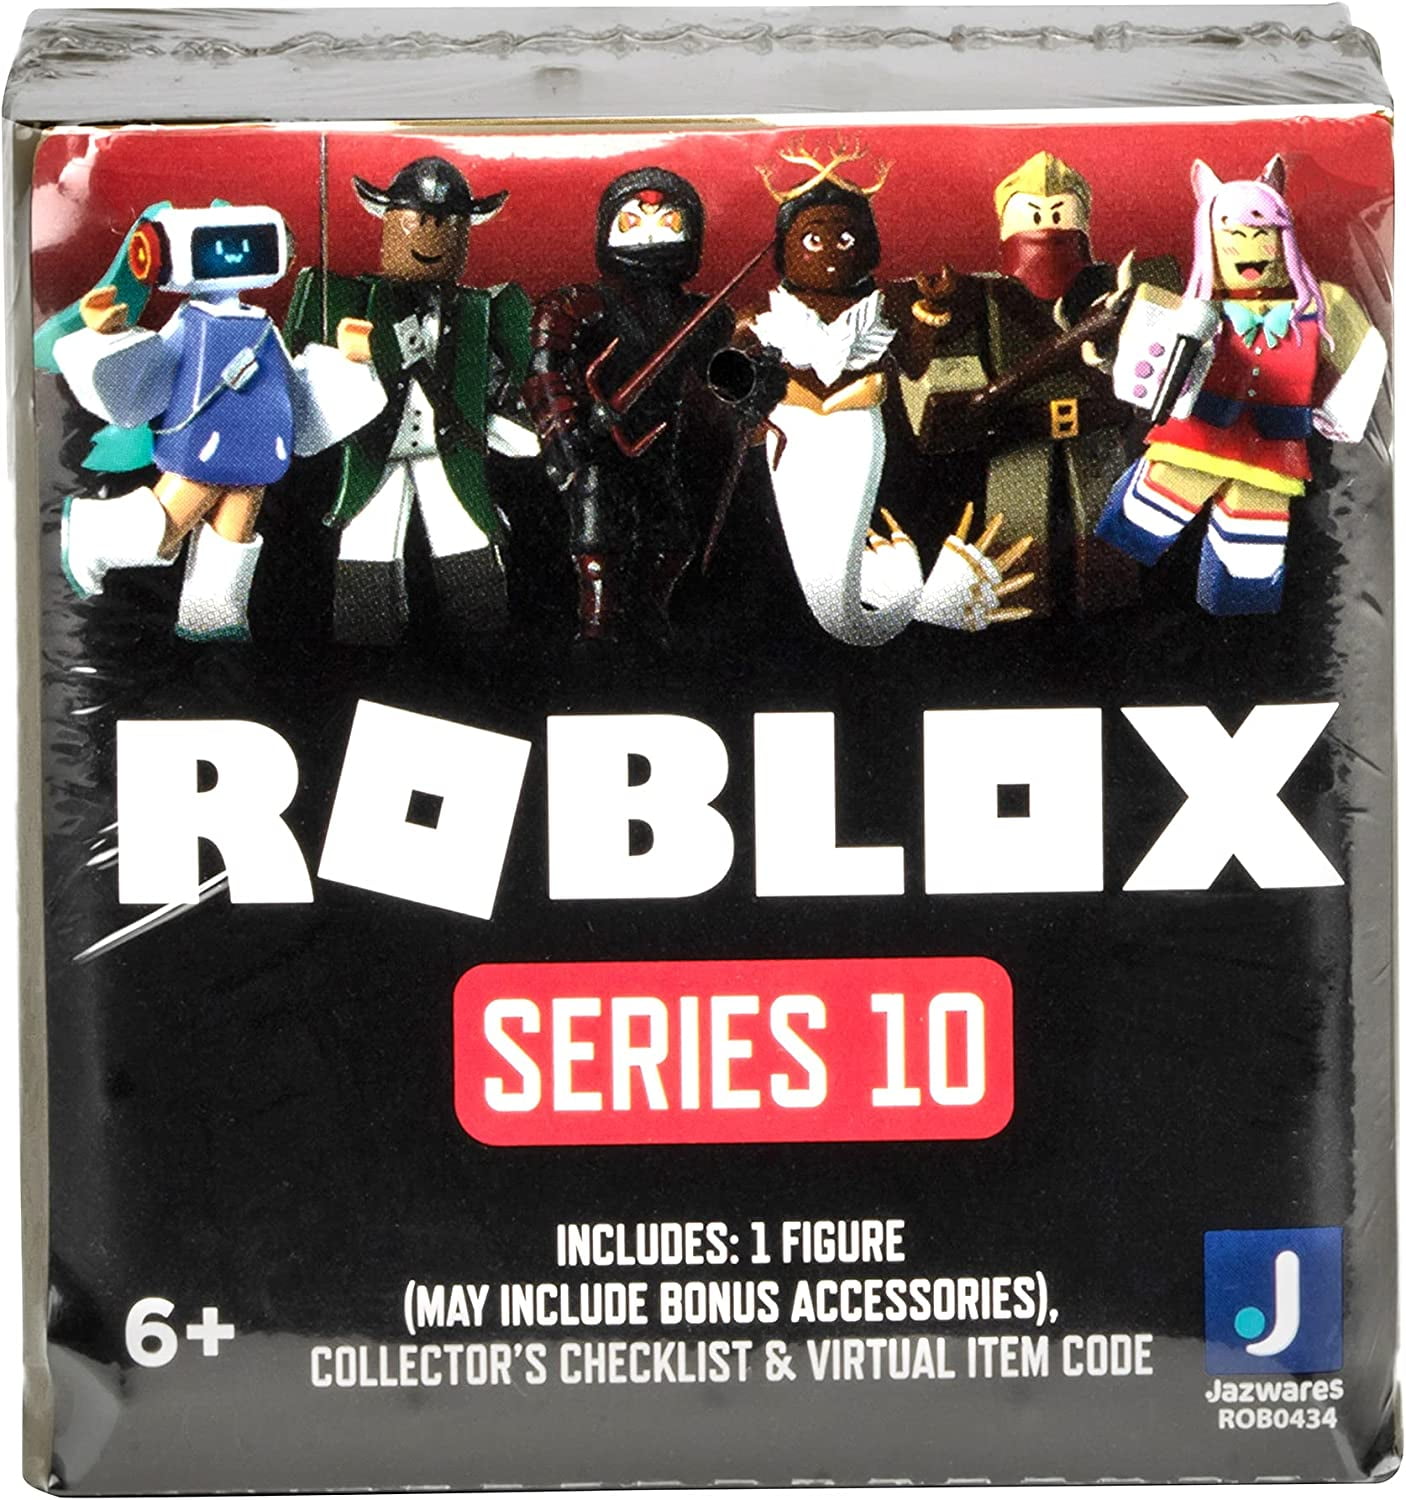 Roblox Toy Codes Set of 12 Ready to Redeem Exclusive Virtual Items